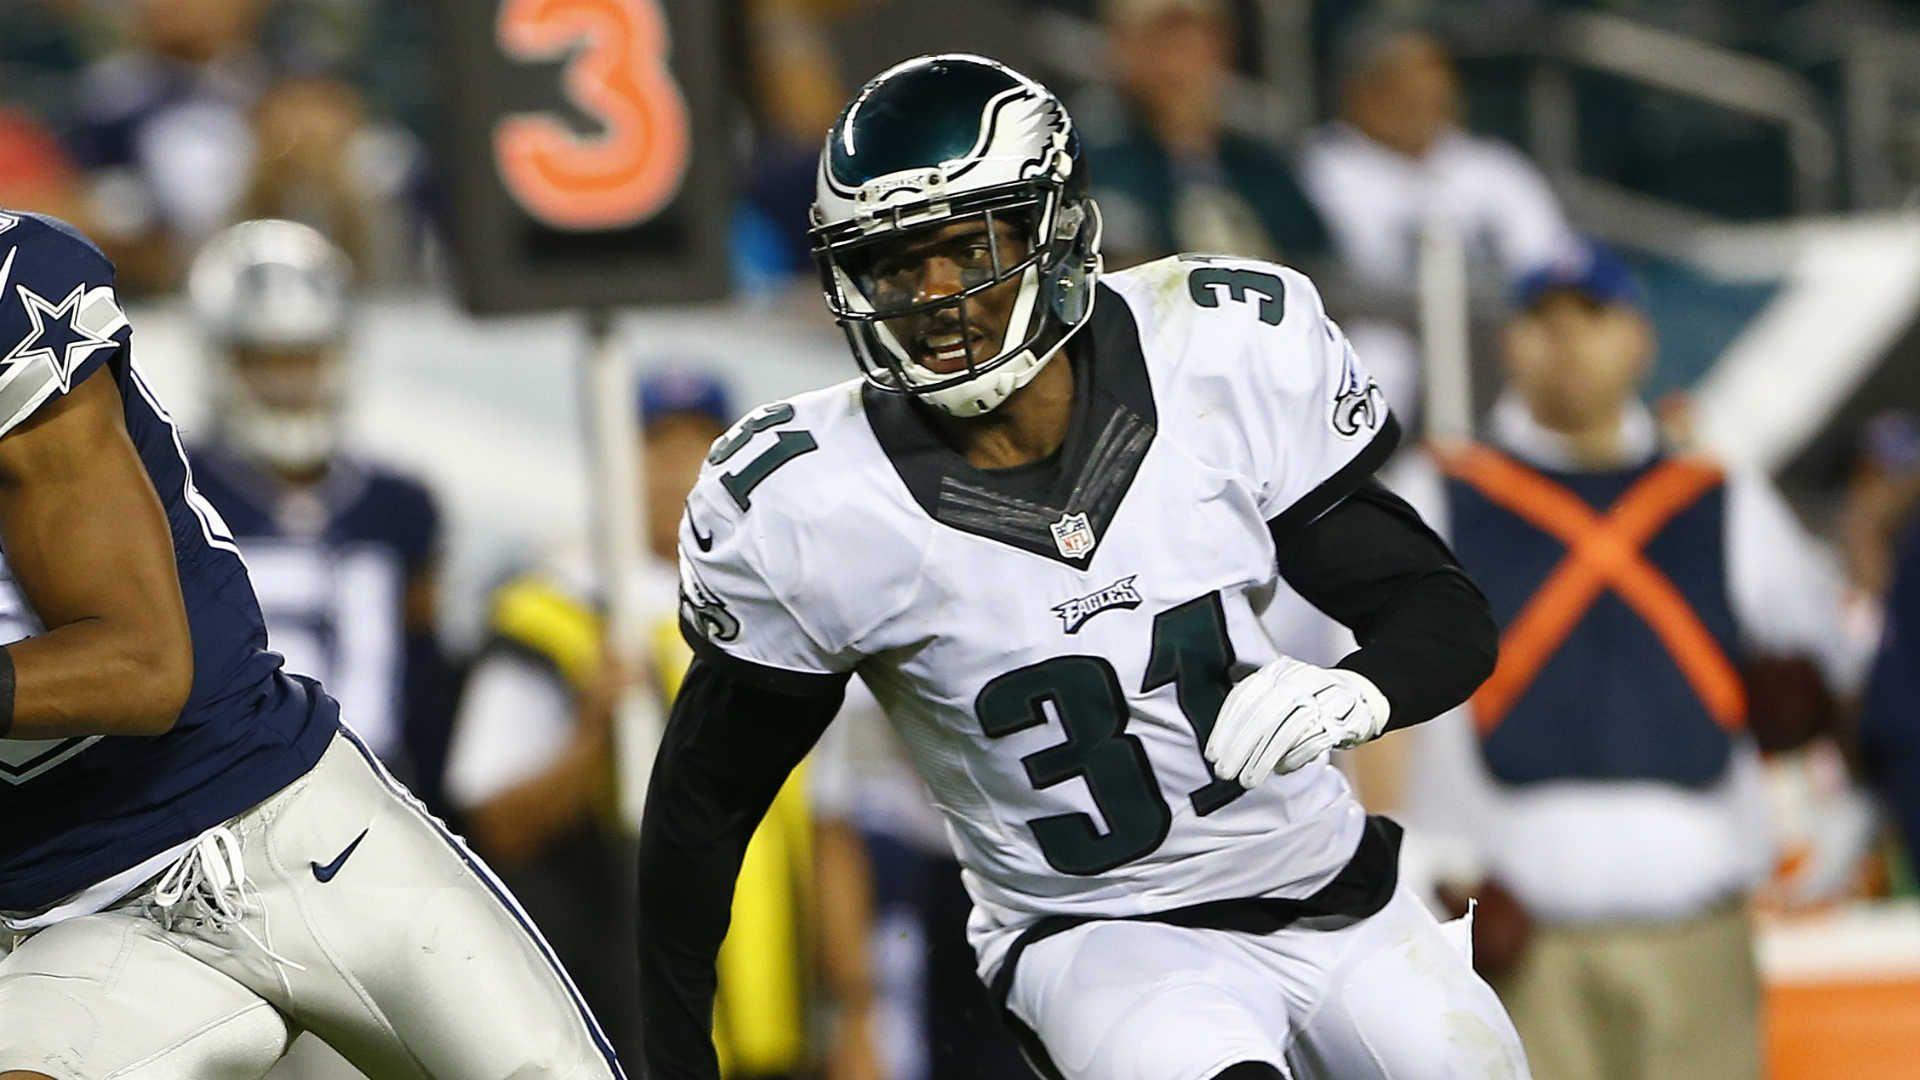 Eagles trade Byron Maxwell and Kiko Alonso to Dolphins, report